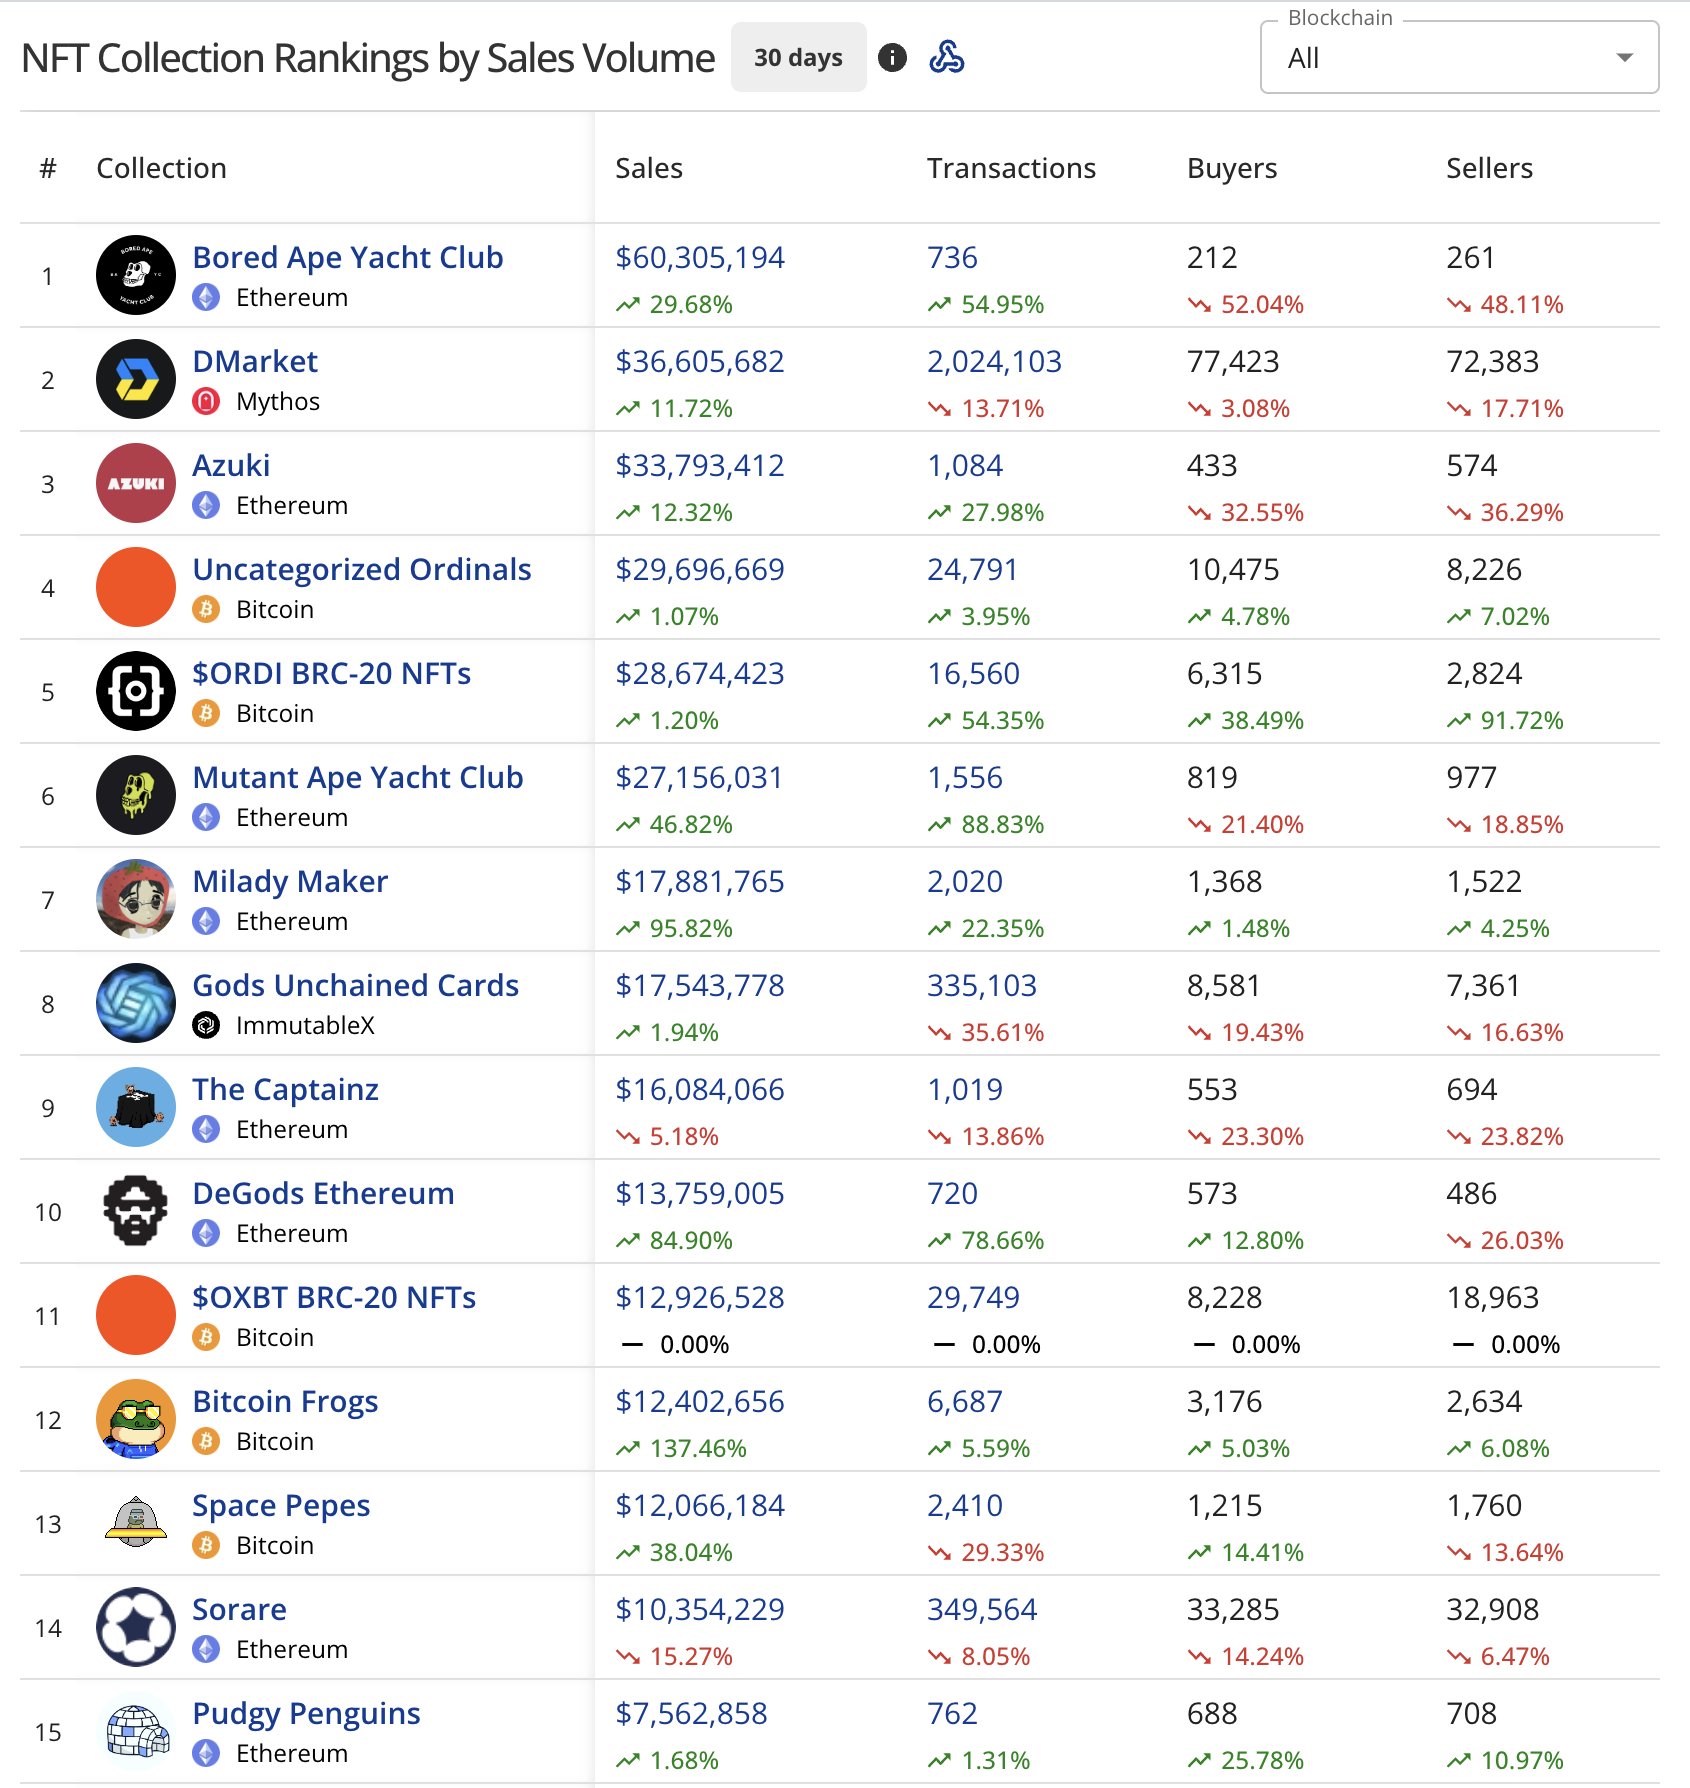 Top 15 NFT Collections by Sales Volume, CryptoSlam